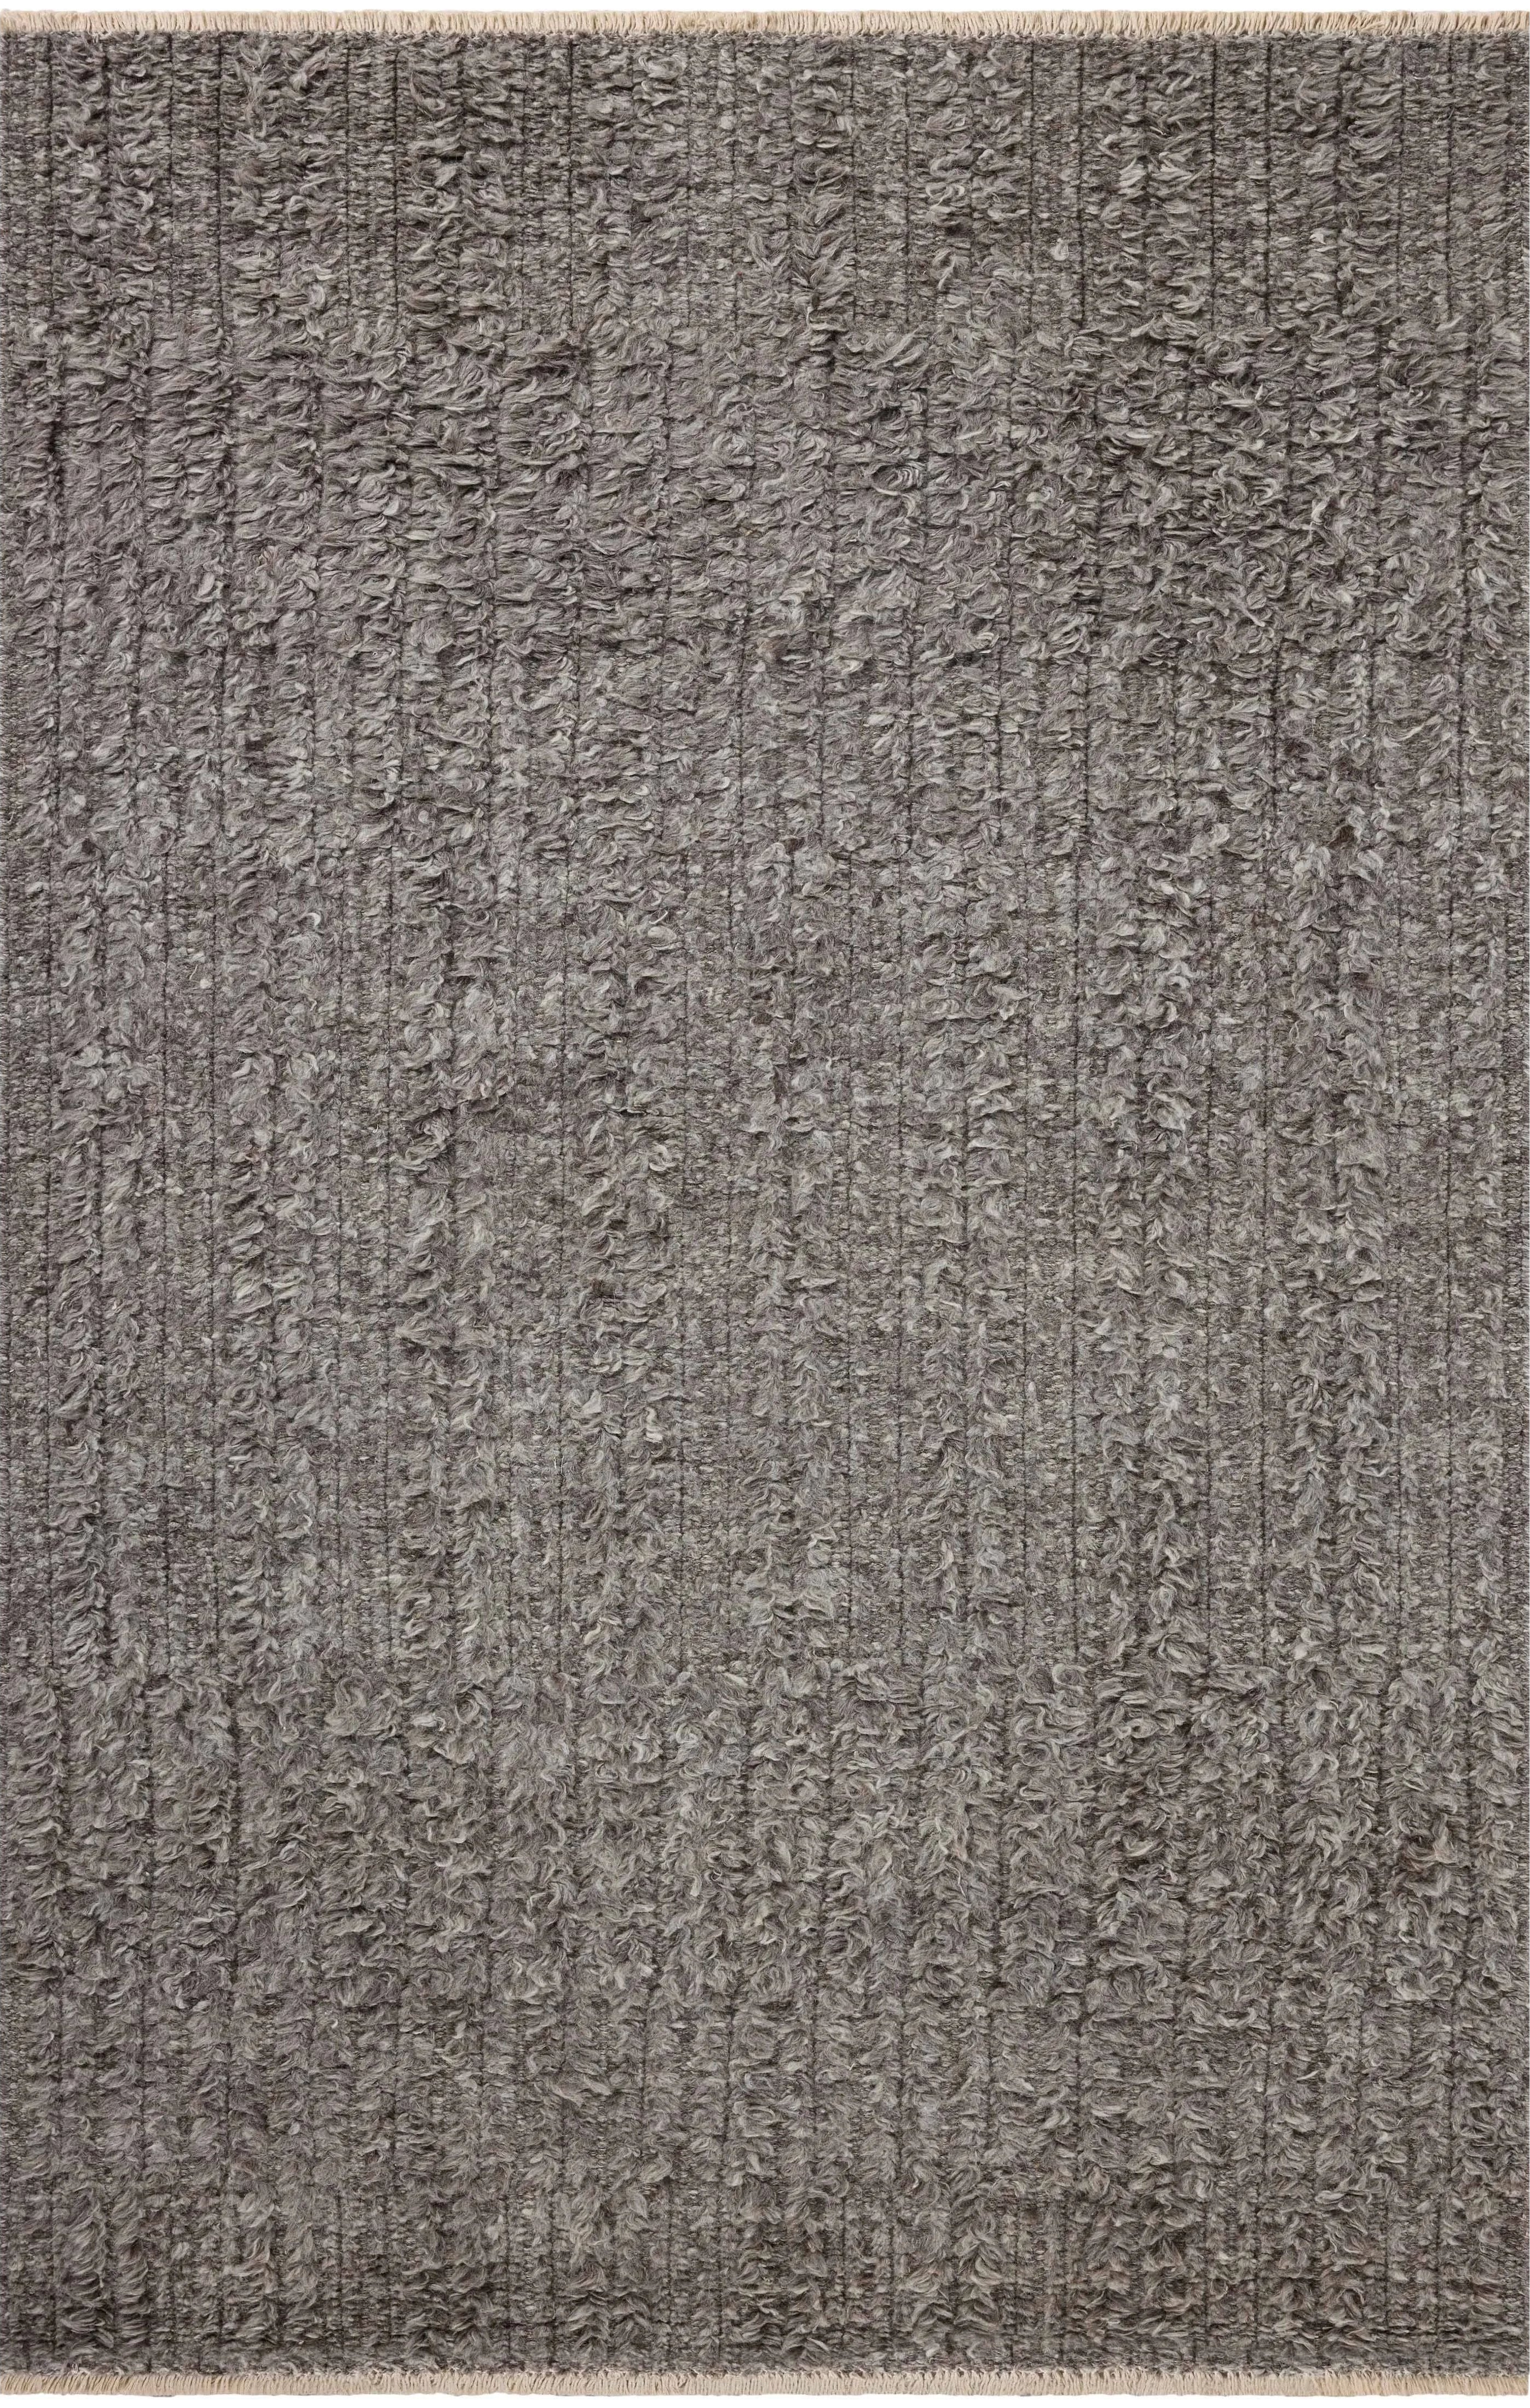 Irresistible to walk upon, the Dana Granite Rug by Brigette Romanek x Loloi has a high-low texture that alternates between a subtly shaggy pile and a soft base. Horizontal broken stripes give the area rug a fresh and energized structure, while a finish of fringe along the edges accentuates its sense of movement. Amethyst Home provides interior design, new home construction design consulting, vintage area rugs, and lighting in the Miami metro area.